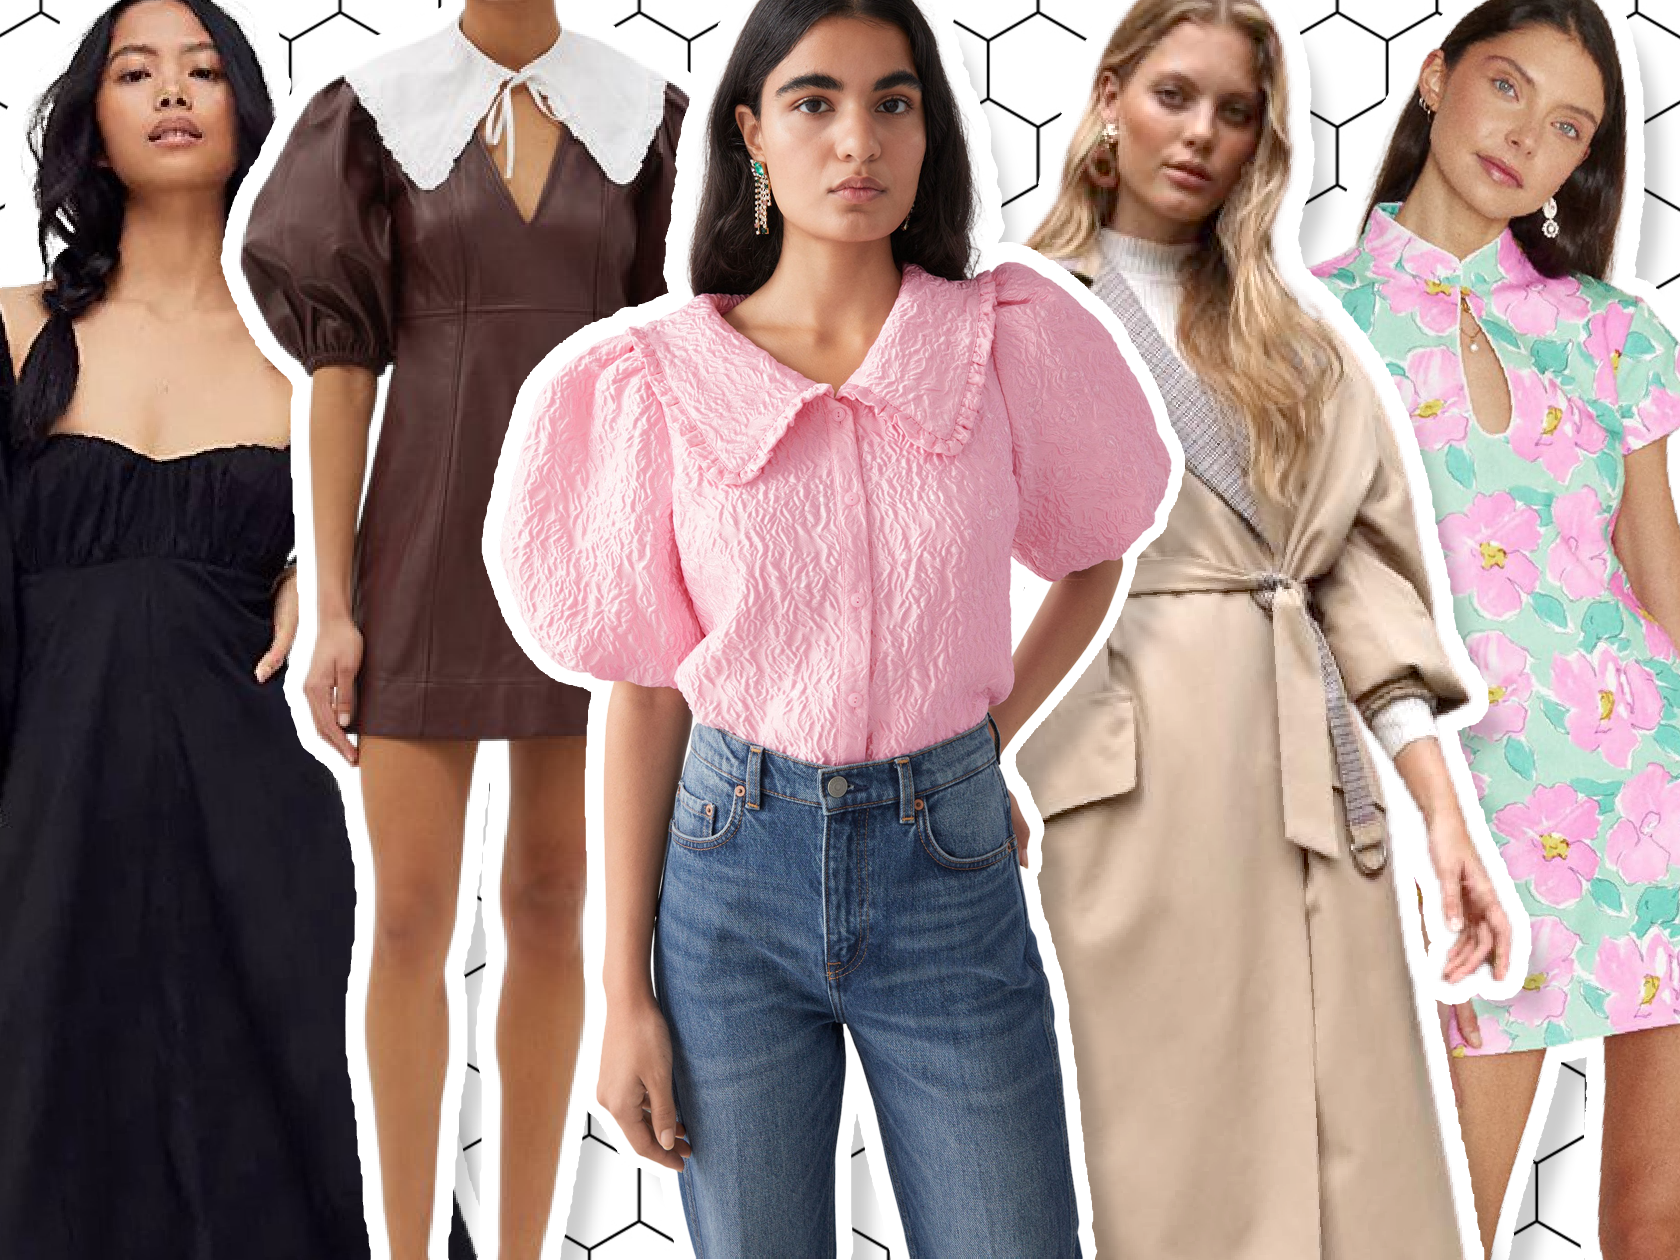 The Biggest Spring/Summer 2021 Fashion Trends